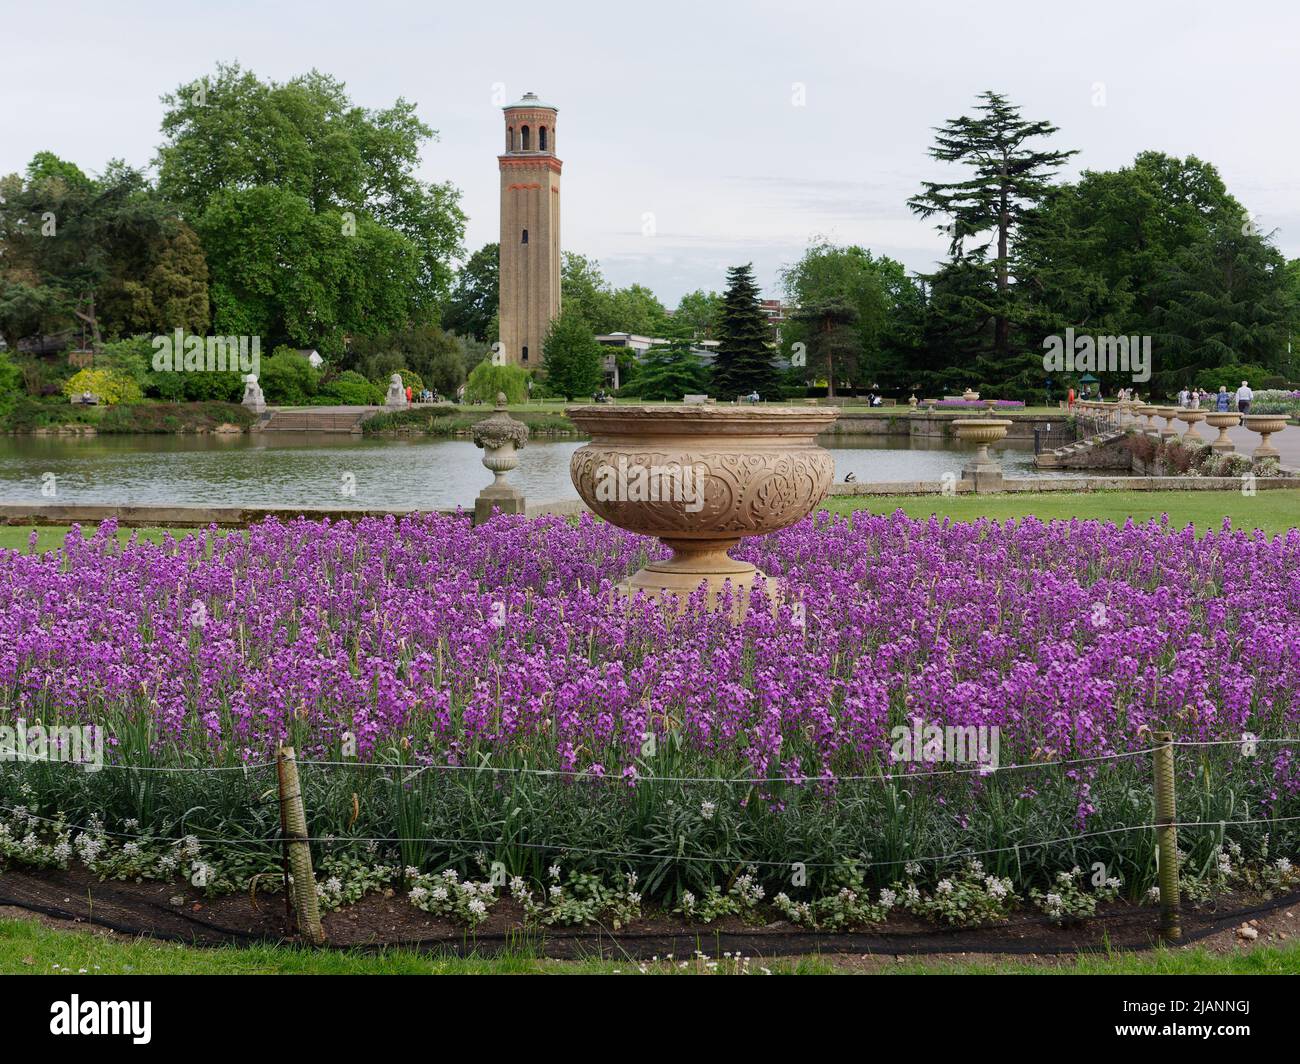 Richmond, Greater London, England, May 18 2022: Royal Botanic Gardens Kew. Purple flowers in front of a garden ornament with the pond and tower in the Stock Photo